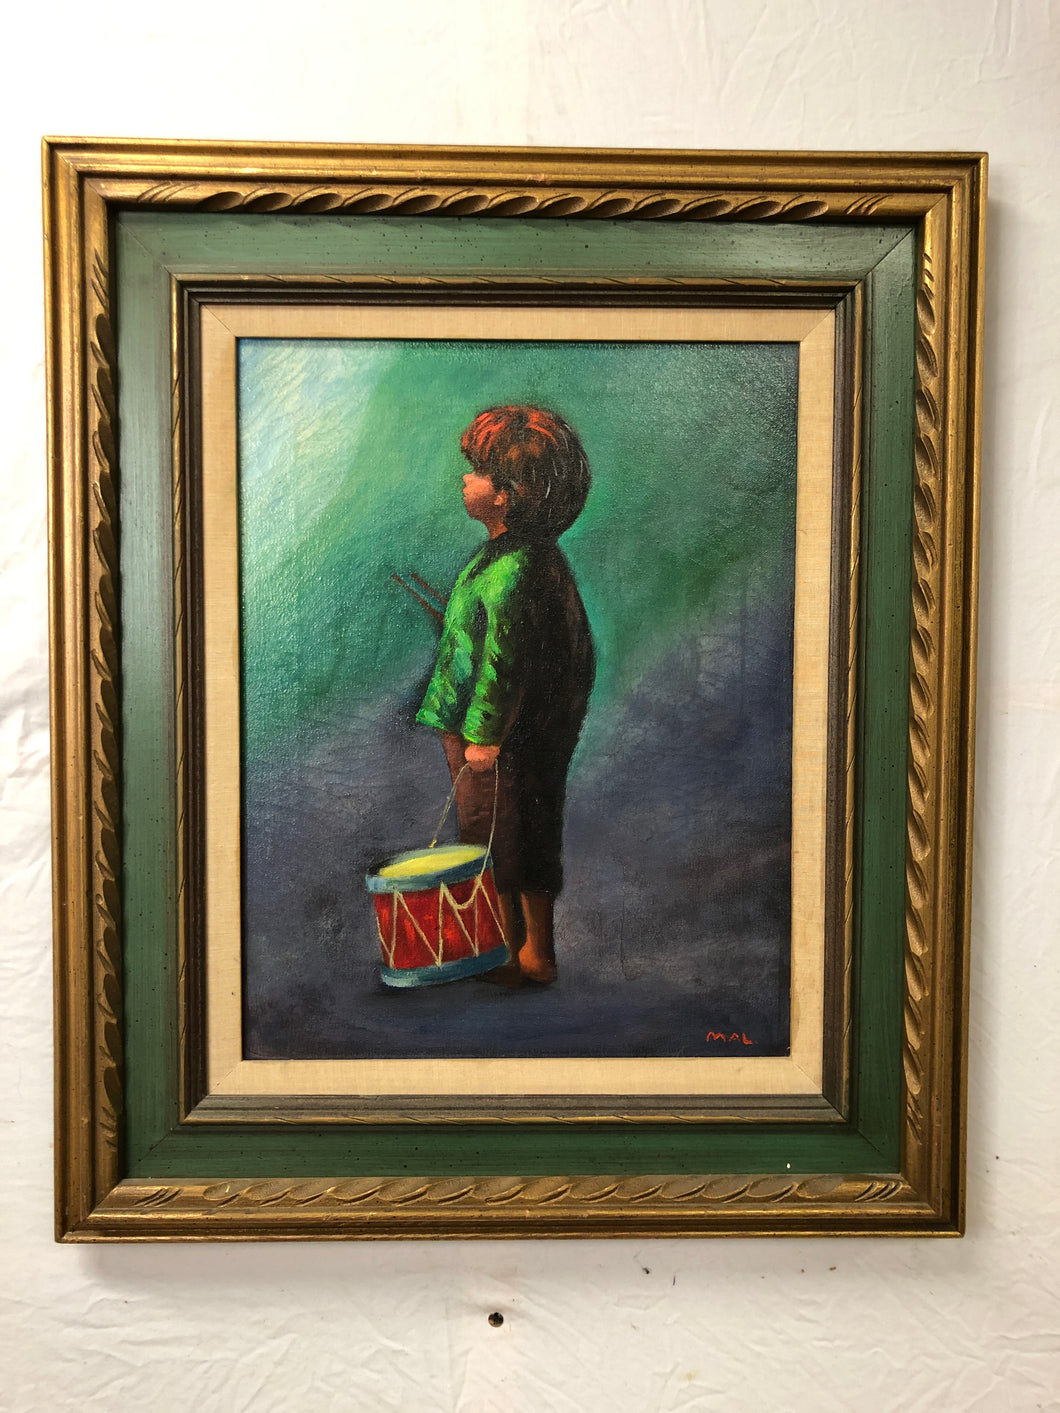 Original Oil on Canvas, Signed at the Bottom